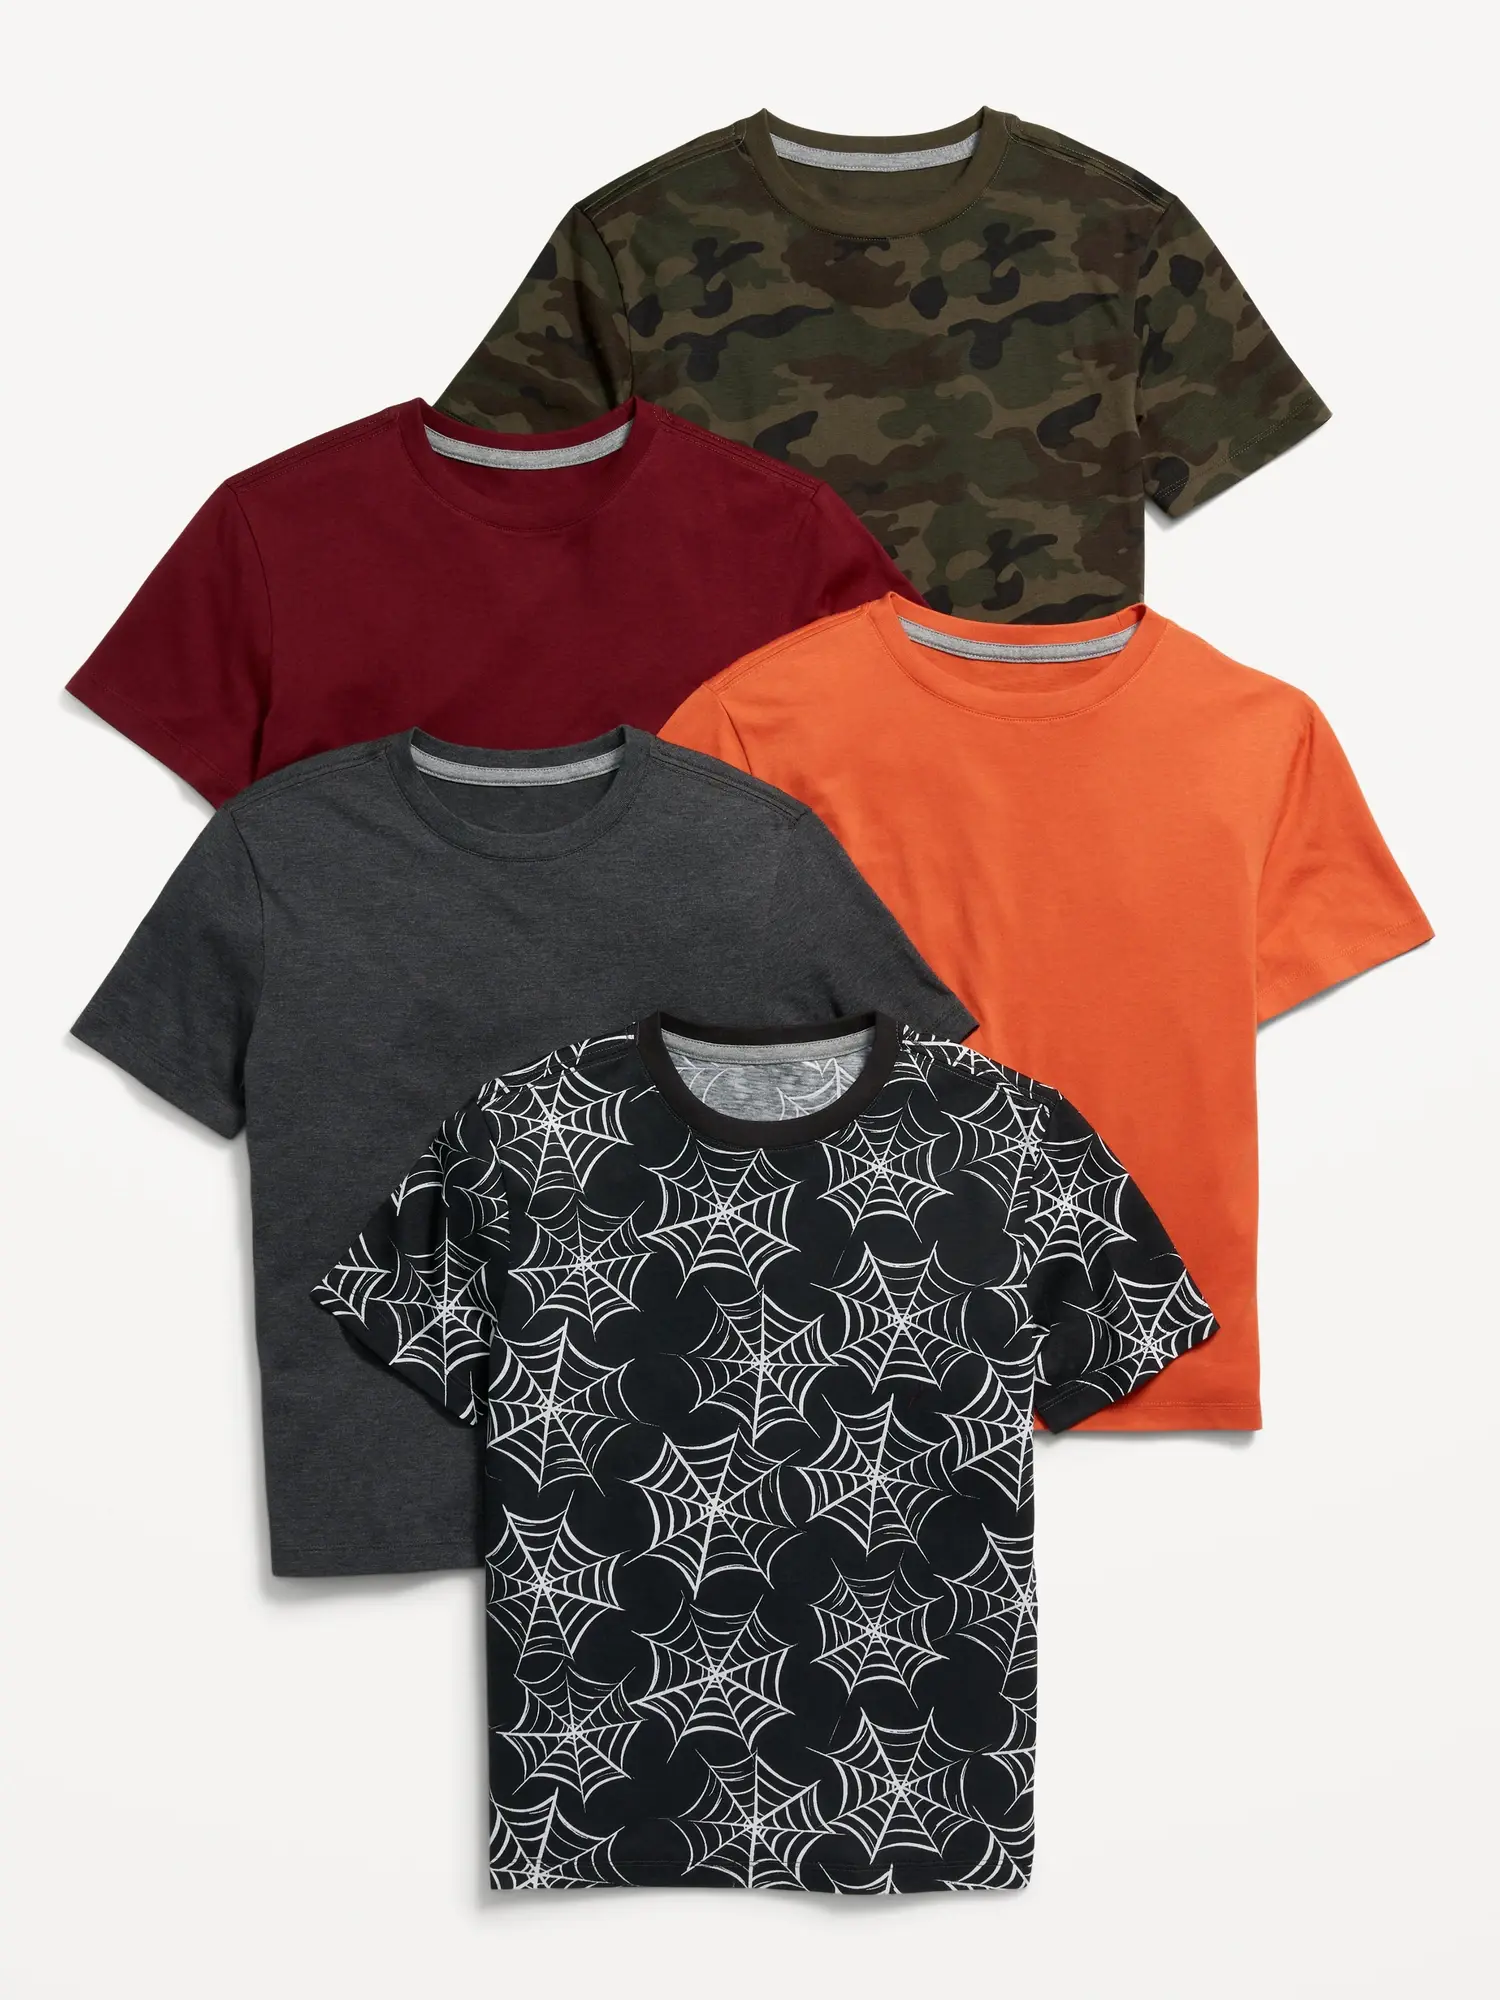 Old Navy Softest Graphic T-Shirt 5-Pack for Boys multi. 1